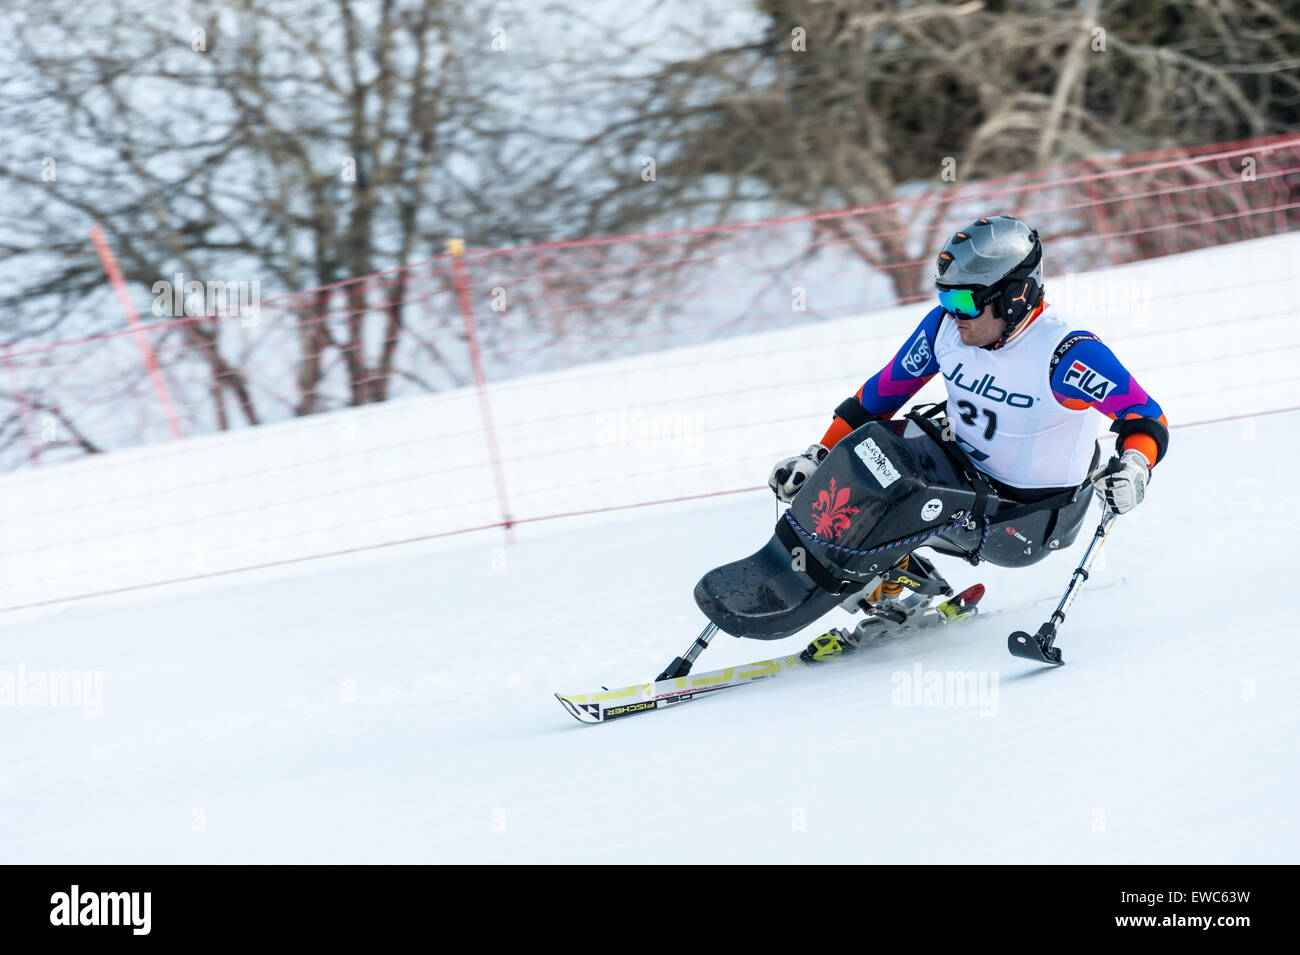 A disabled competitor using specially-adapted ski equipment, racing downhill in a giant slalom race Stock Photo